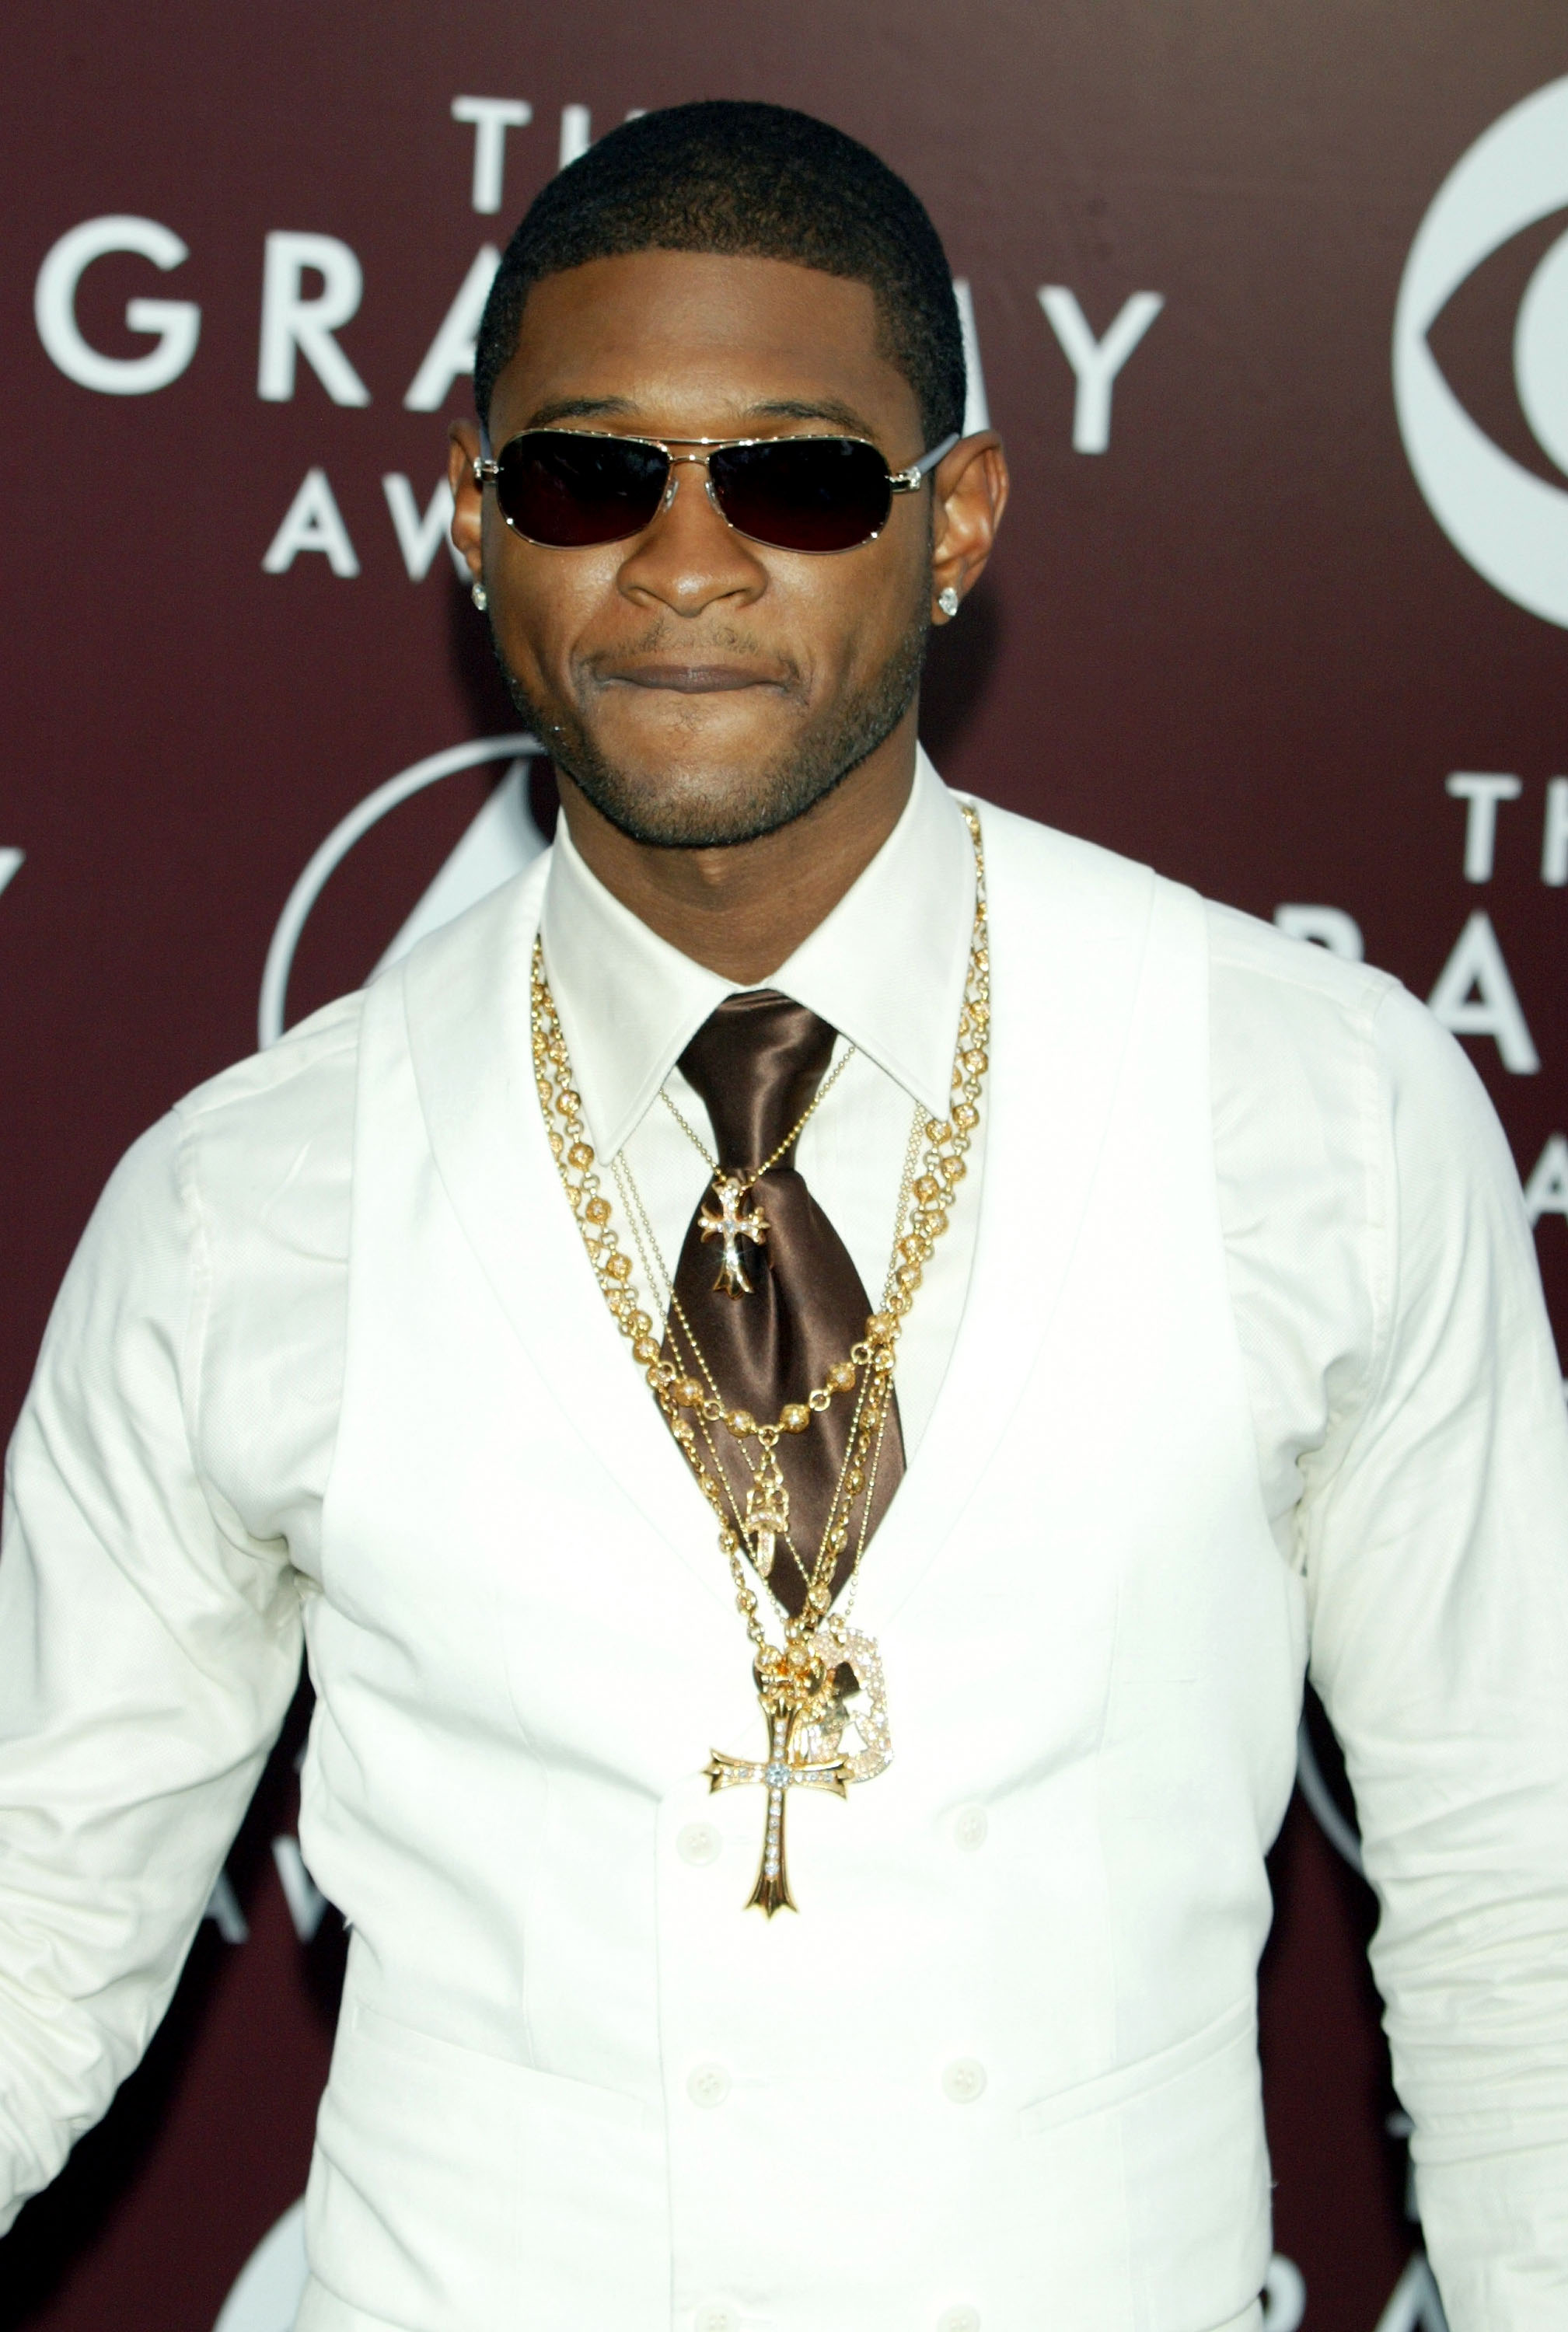 Usher attends the 47th Annual Grammy Awards on February 13, 2005 in Los Angeles, California | Source: Getty Images